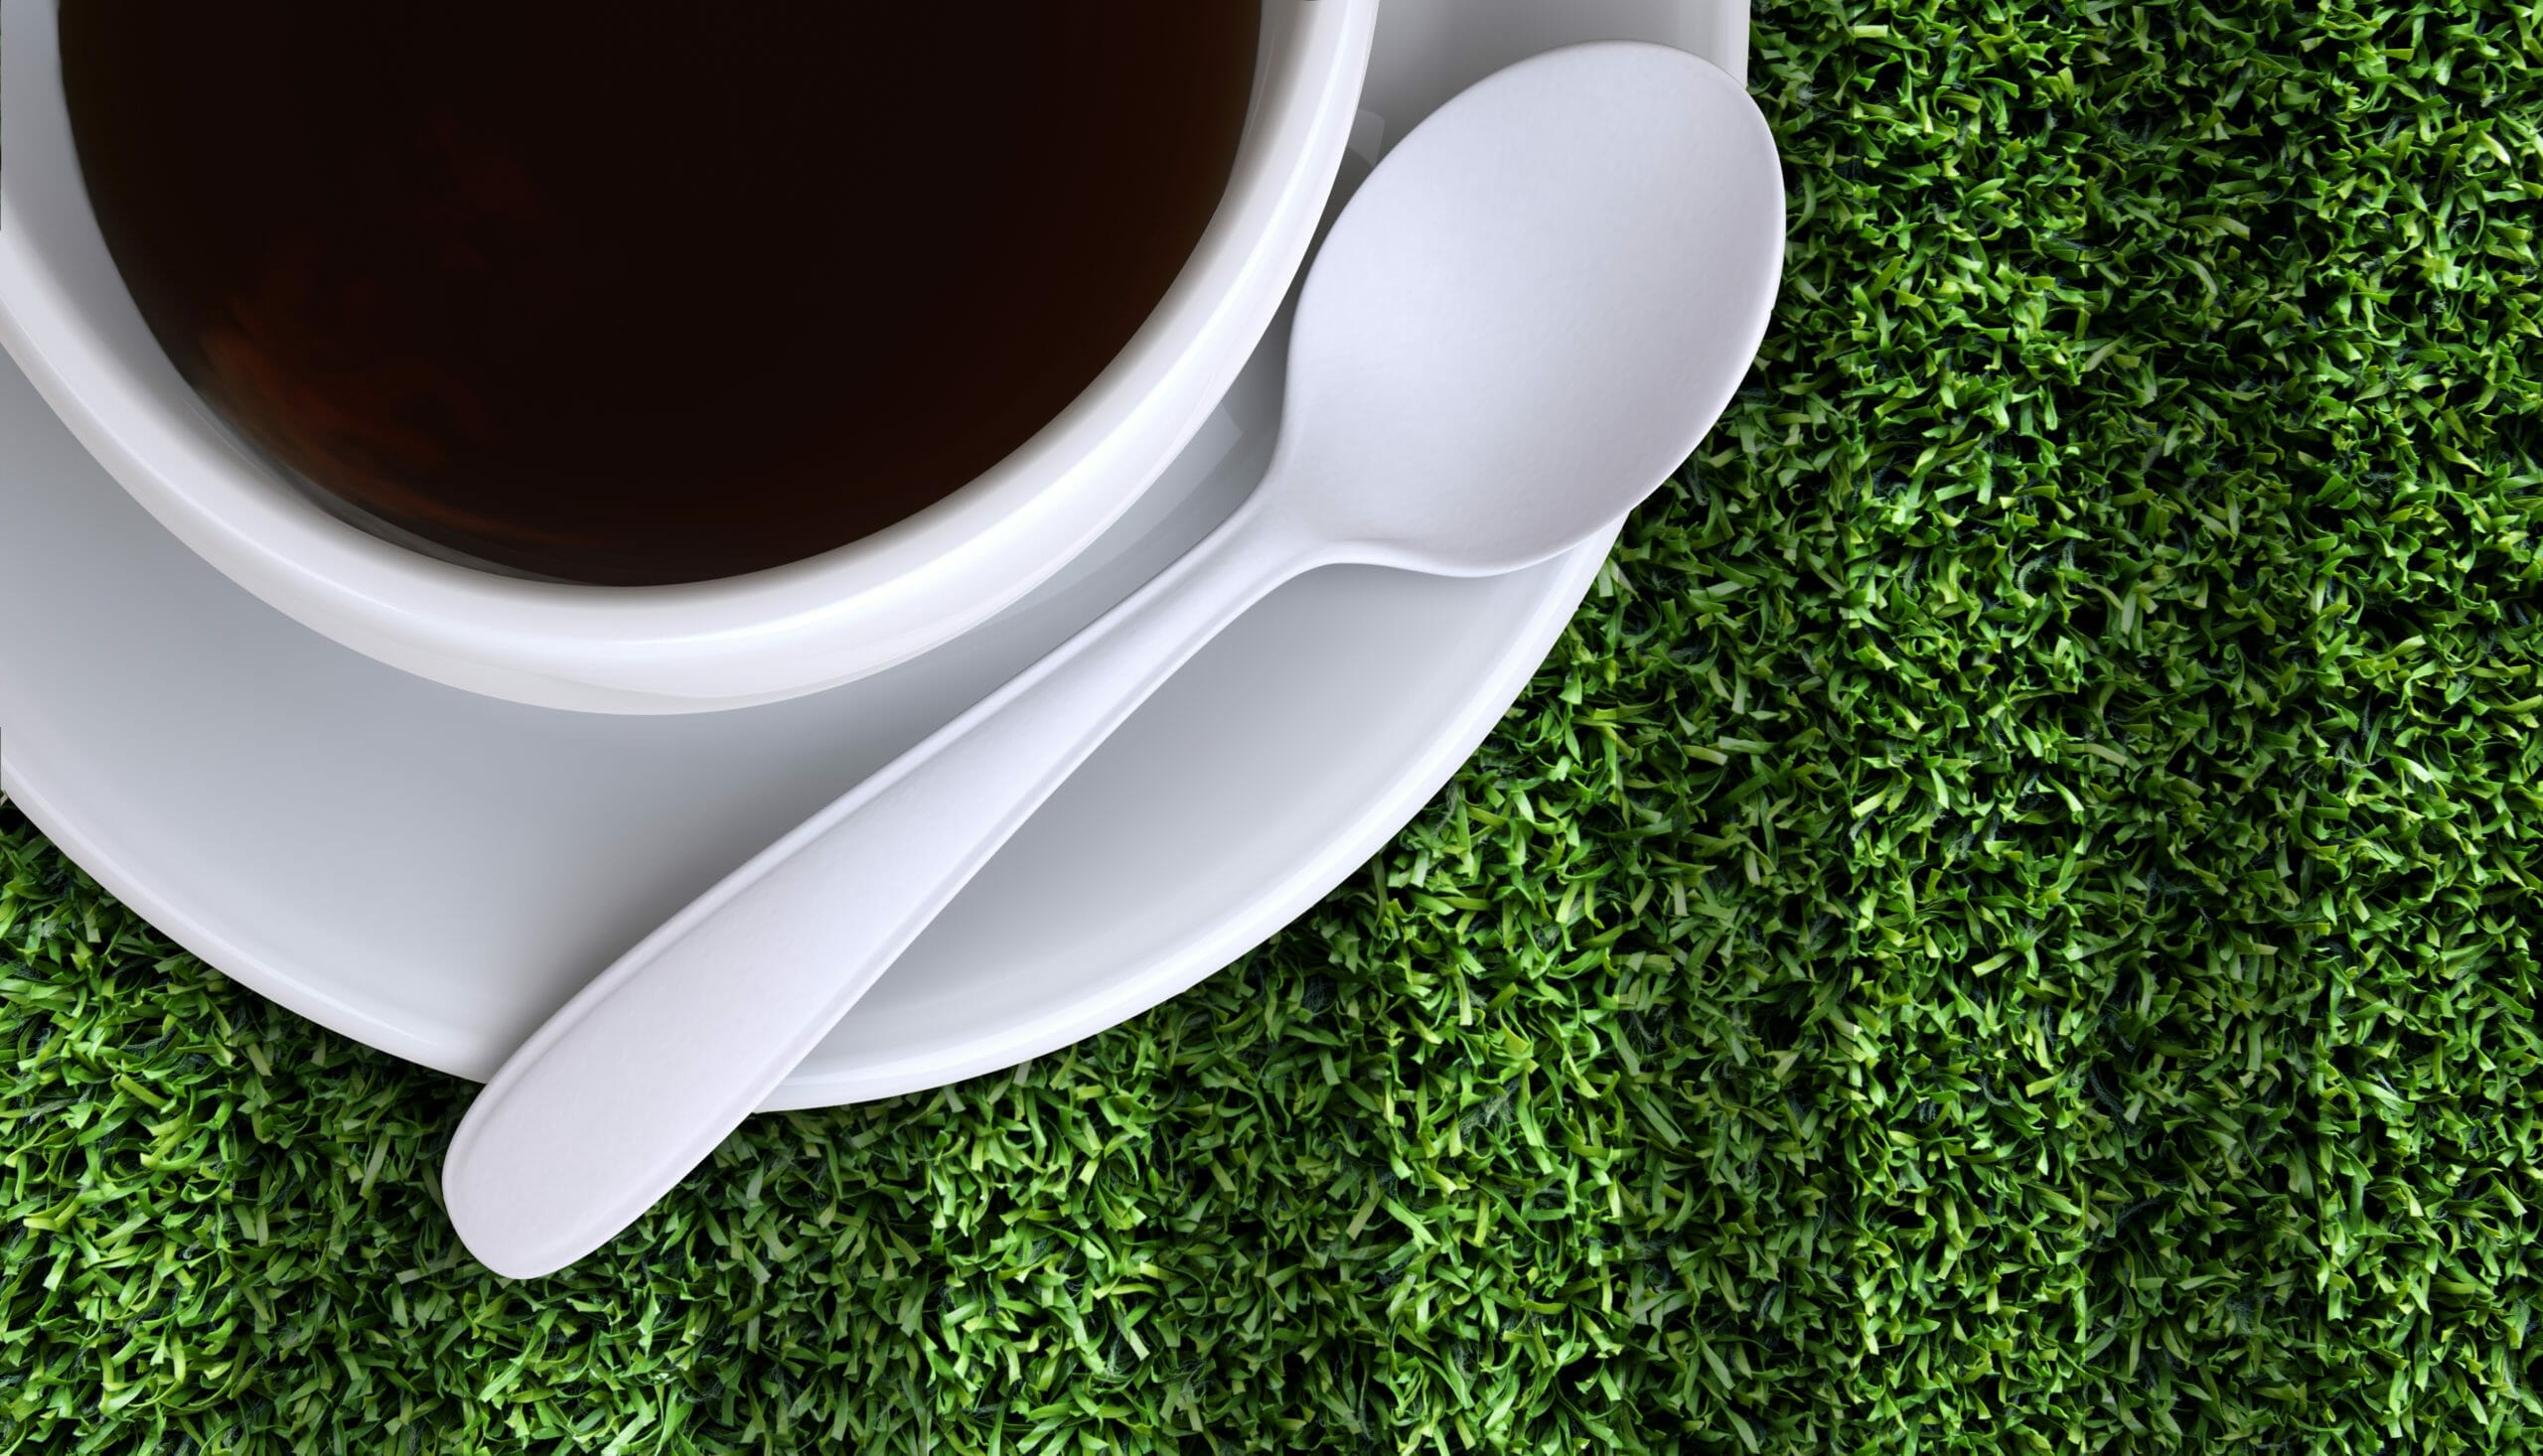 Coffee,With,Grass,Background